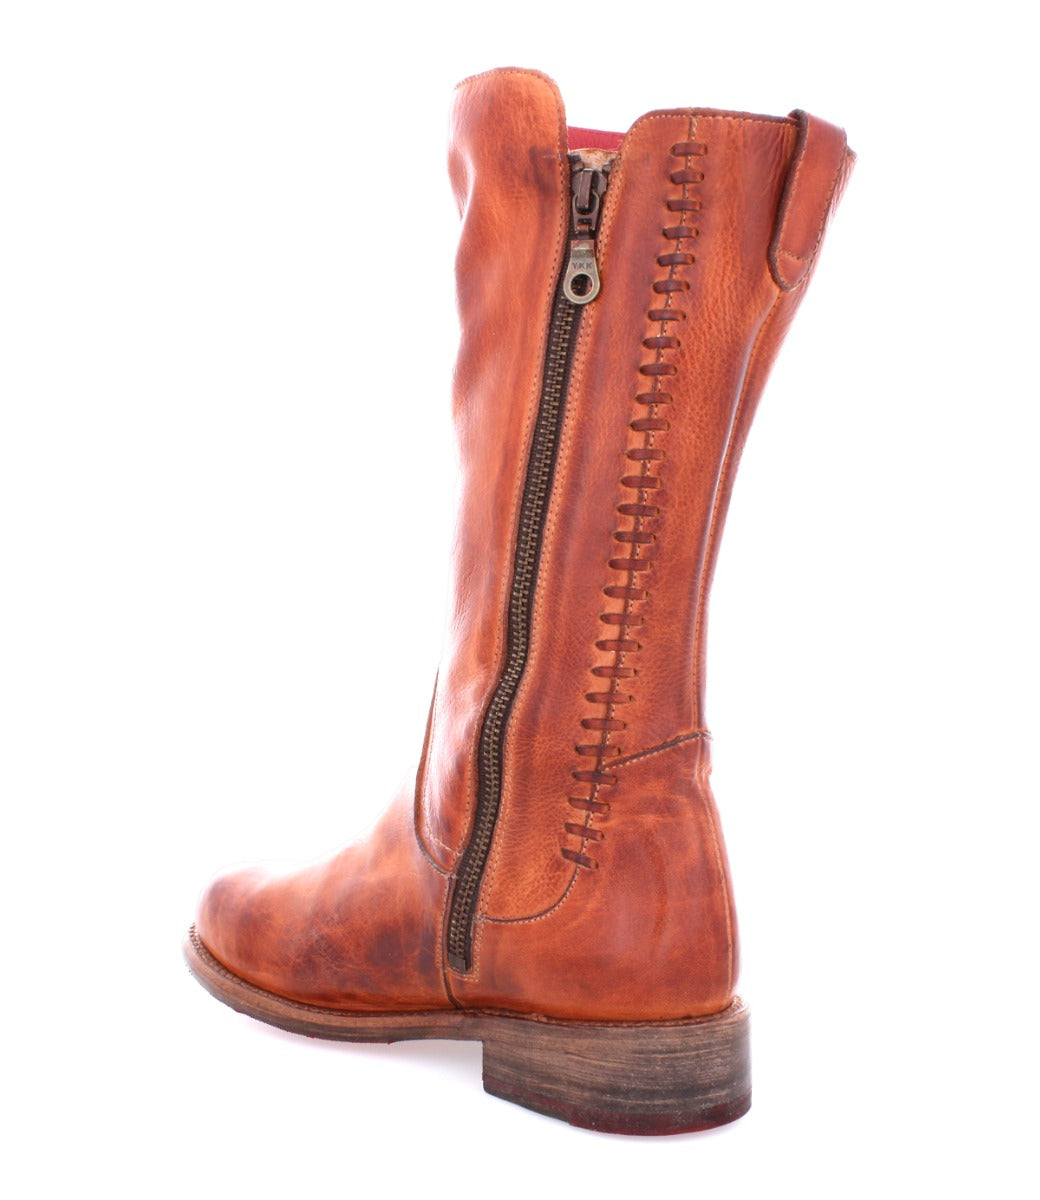 A women's "Latifah" boot by Bed Stu, made of tan leather with a zipper on the side.